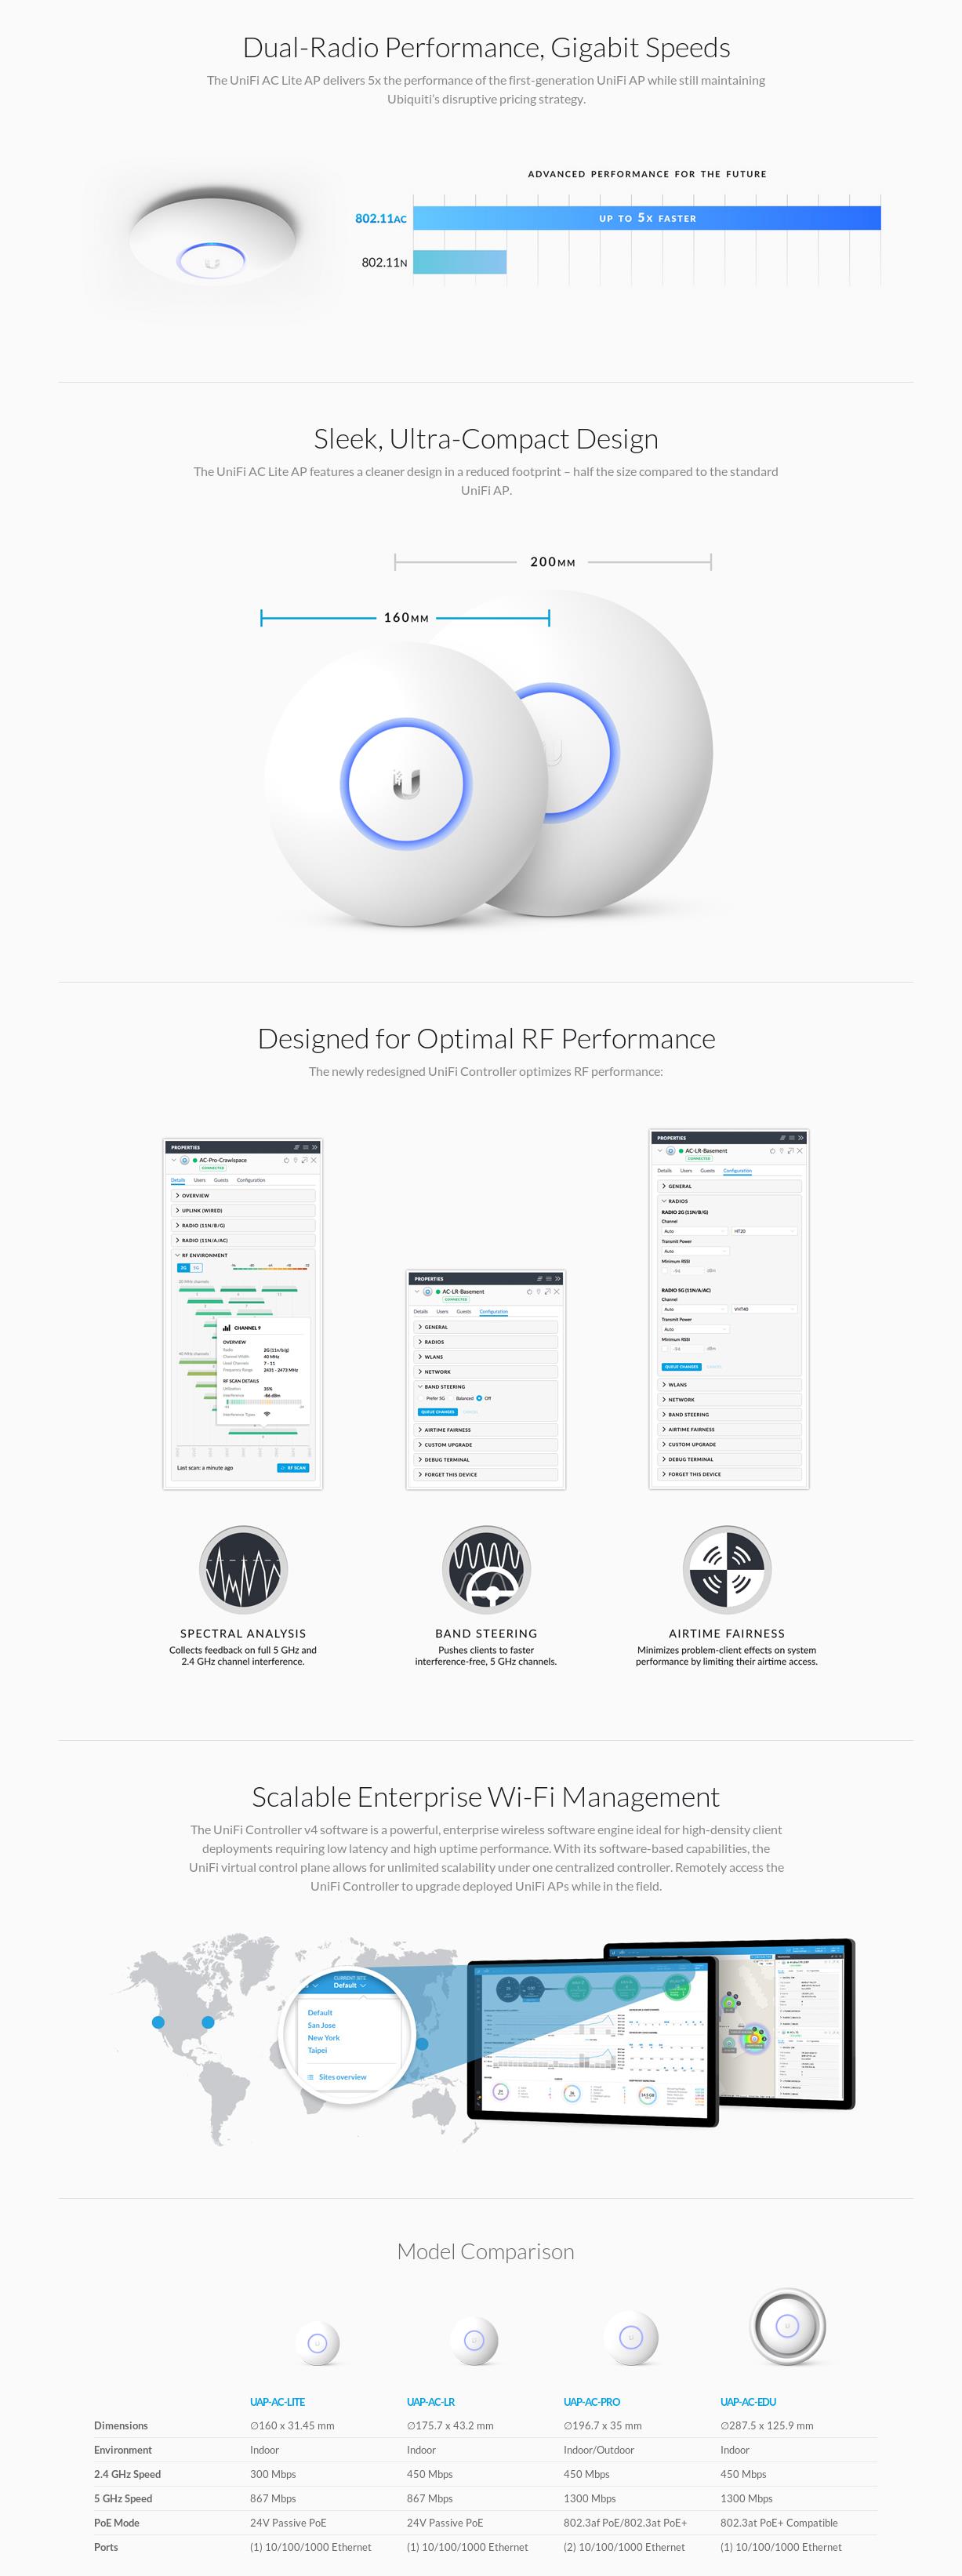 A large marketing image providing additional information about the product Ubiquiti UniFi AP AC Lite Access Point - Additional alt info not provided